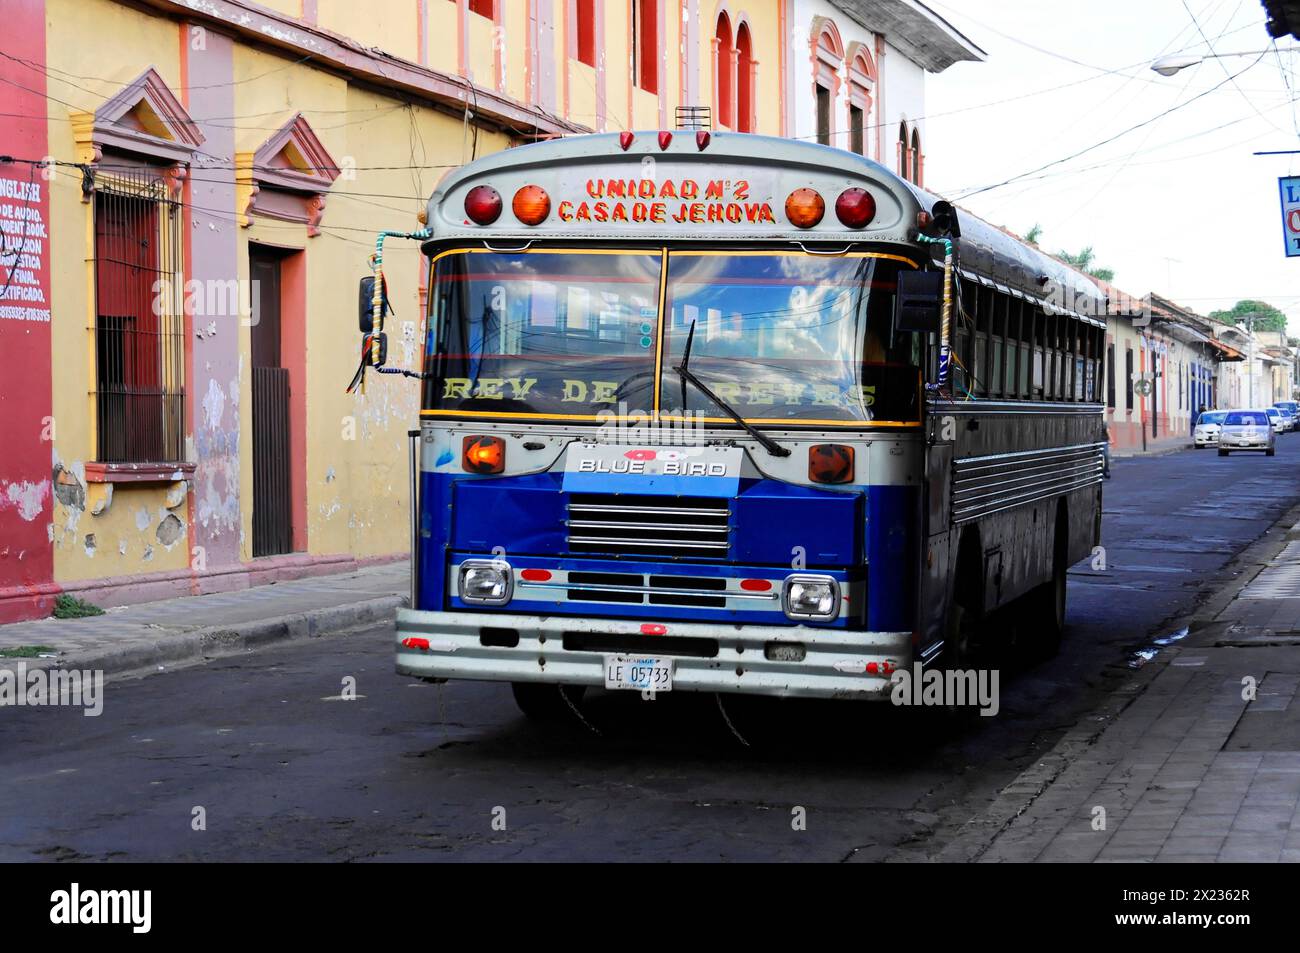 Leon, Nicaragua, Old blue bus parked on the street in a Central American city, Central America, Central America Stock Photo